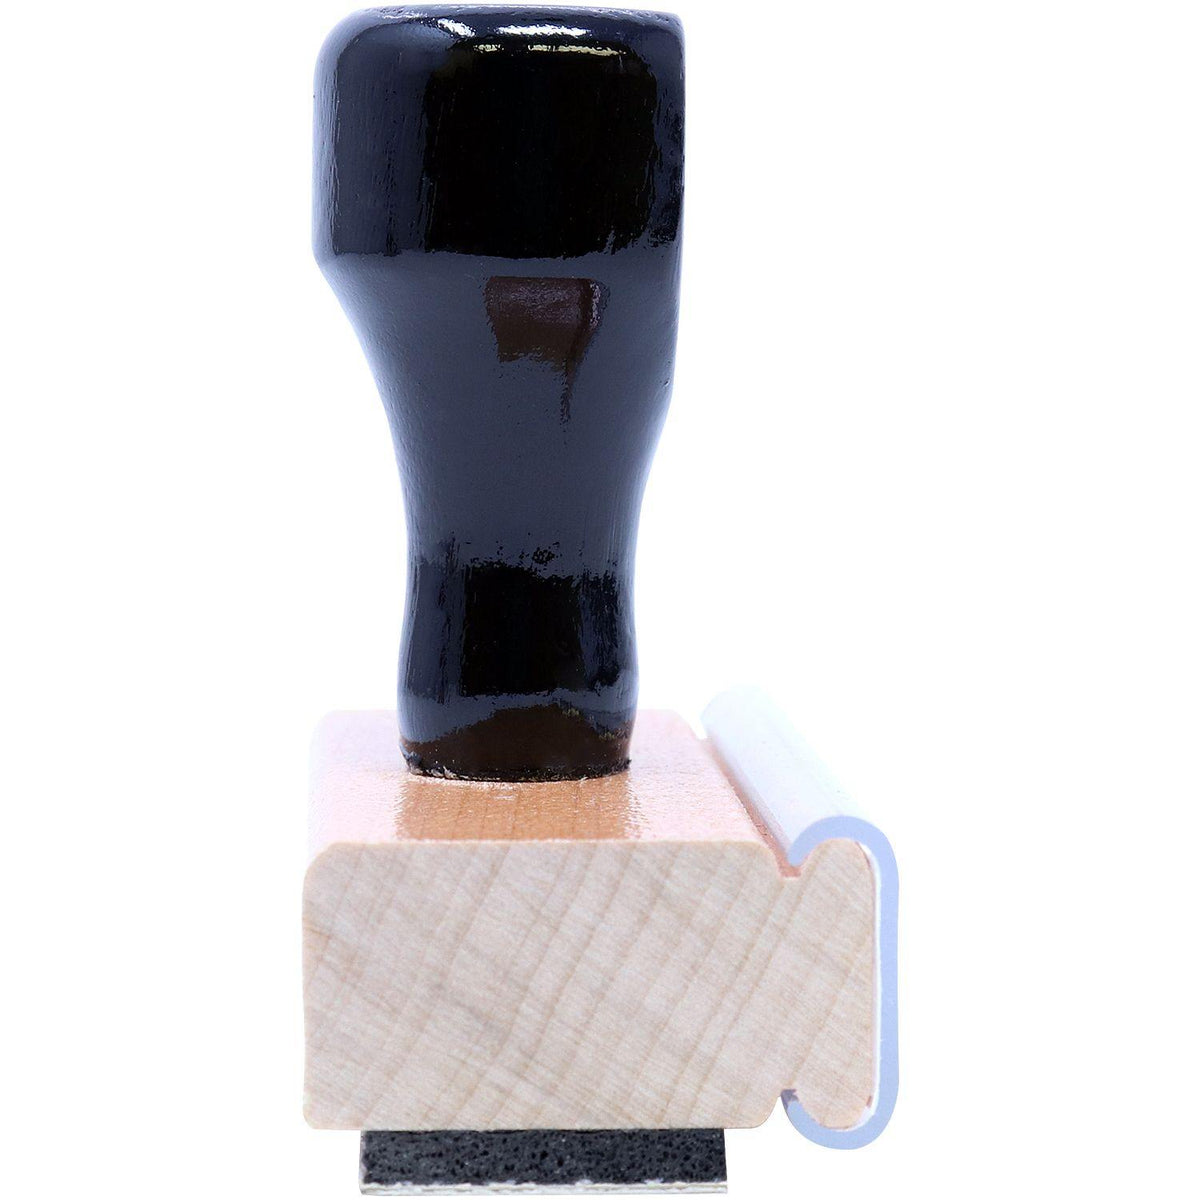 Side View of Large Secure Rubber Stamp